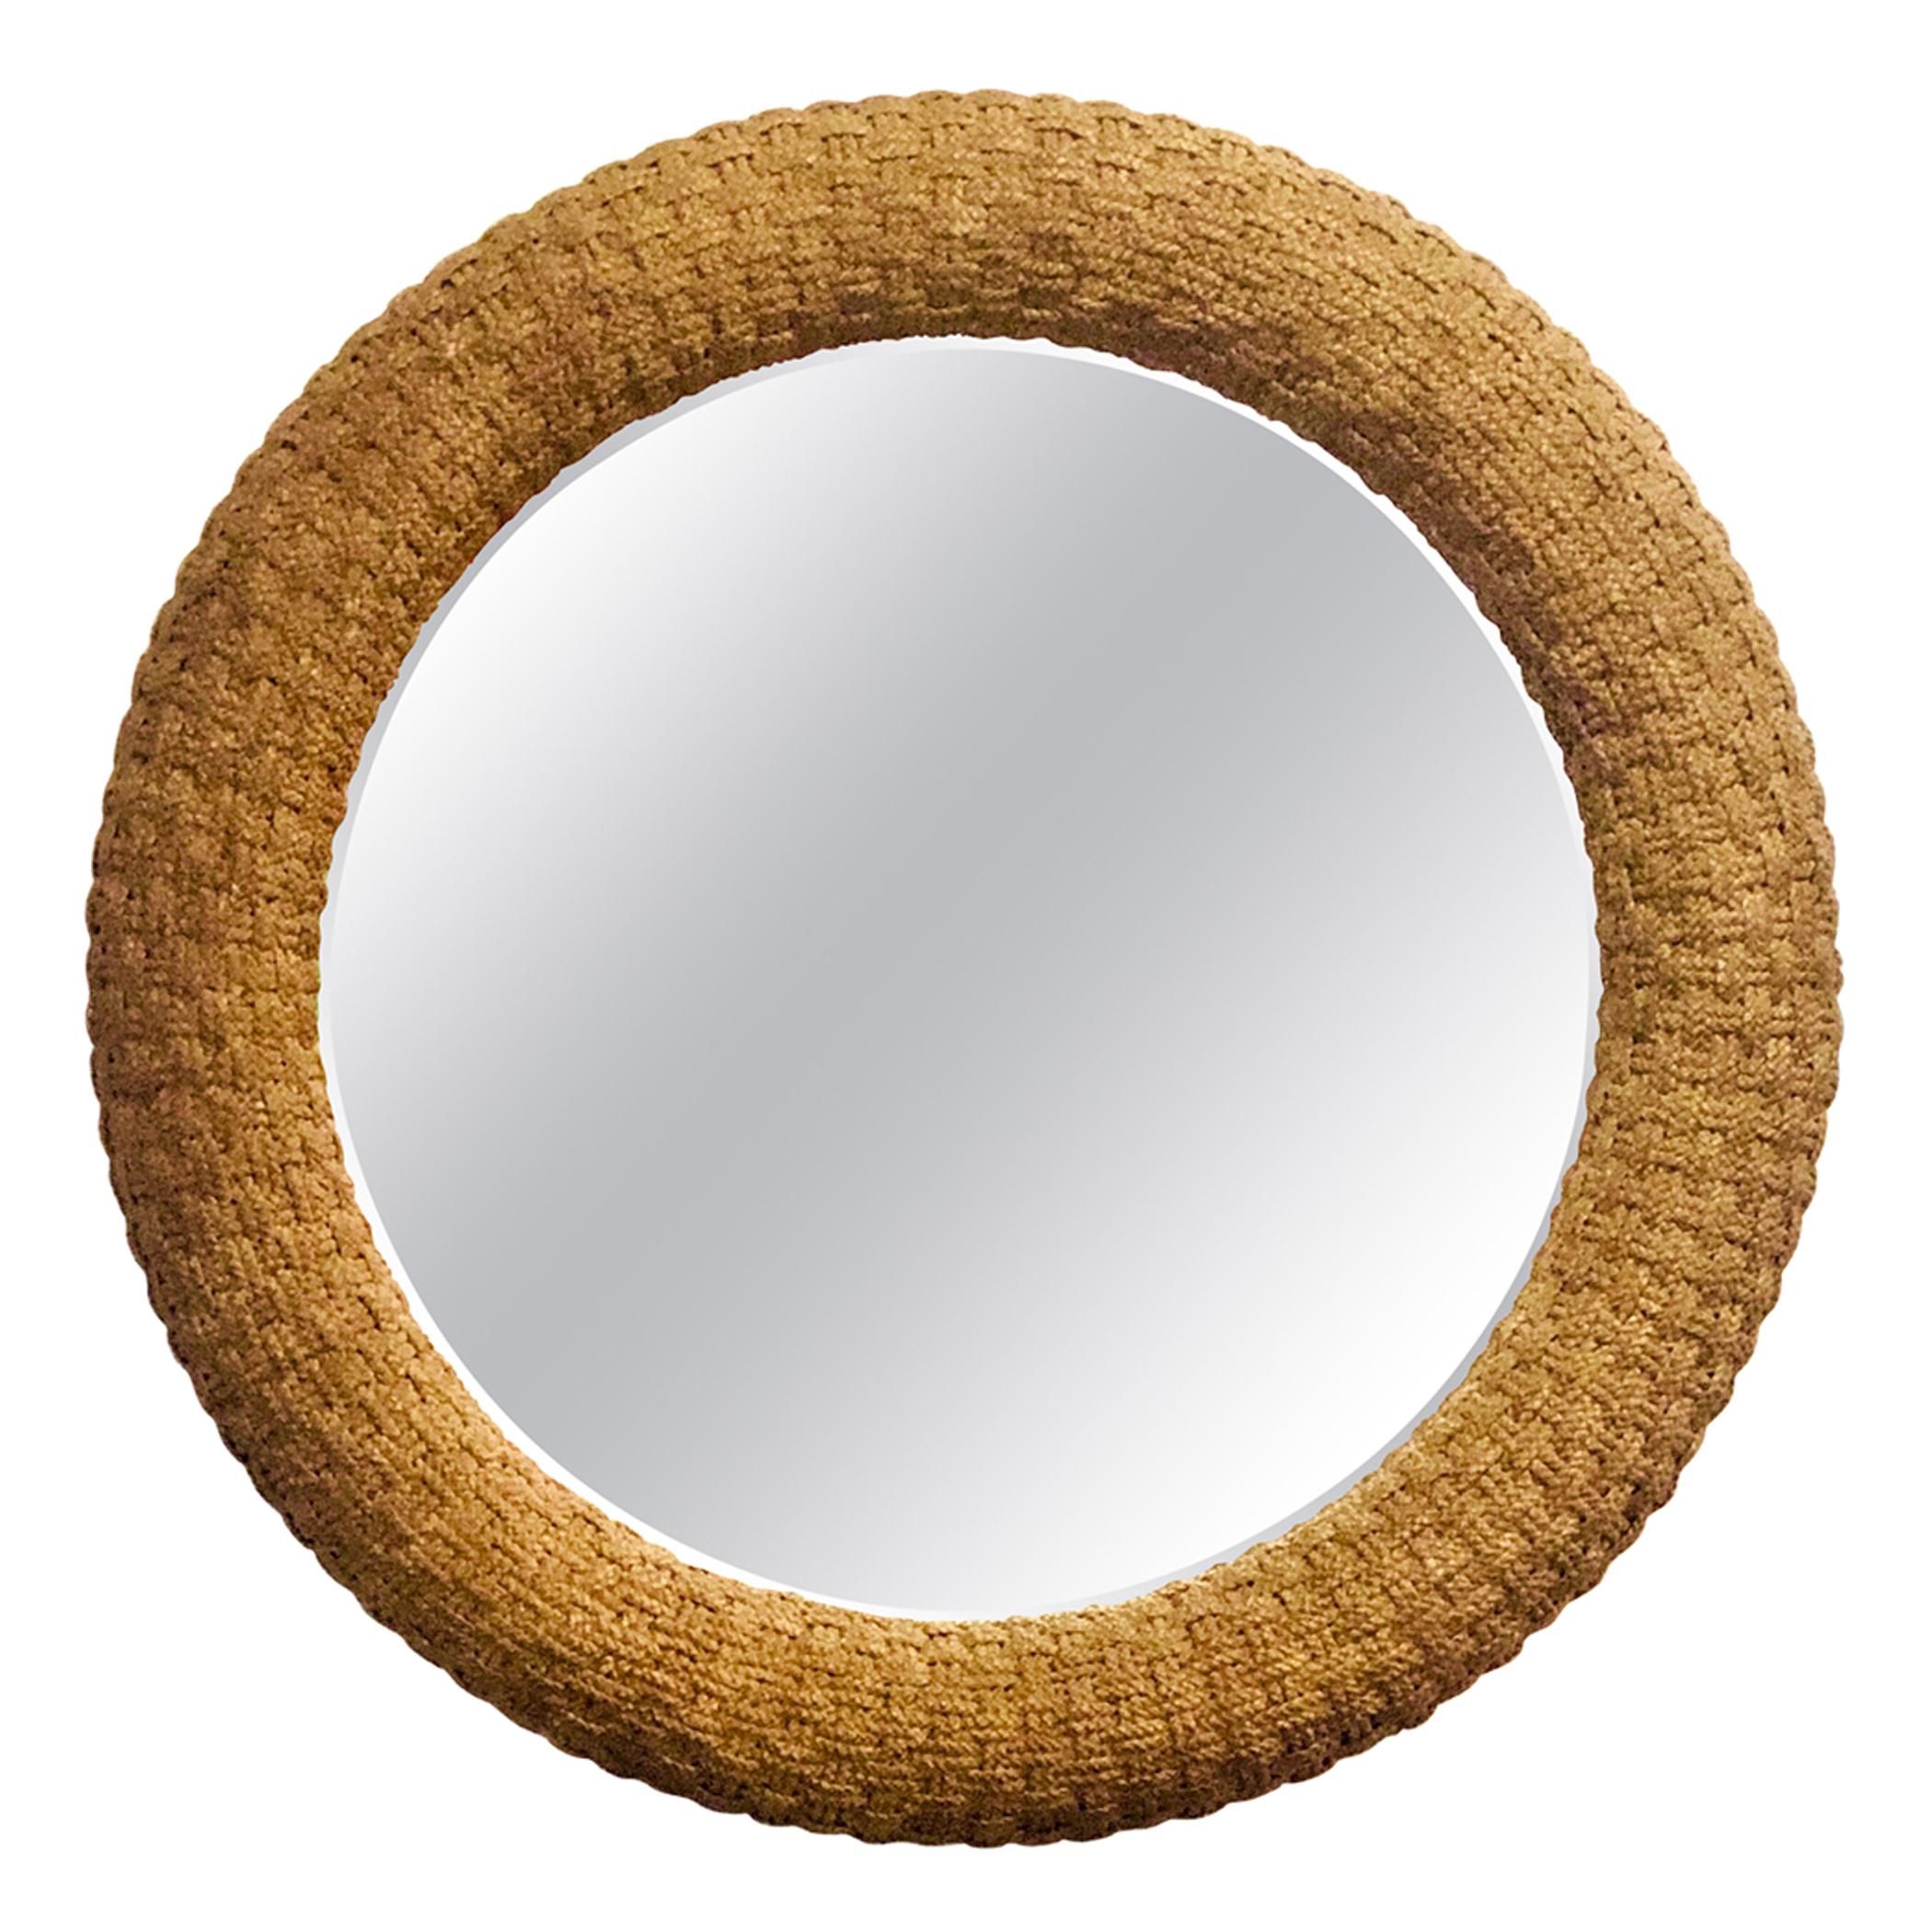 Large Round Mirror with Braided Jute Frame, Pair Available, 1980s